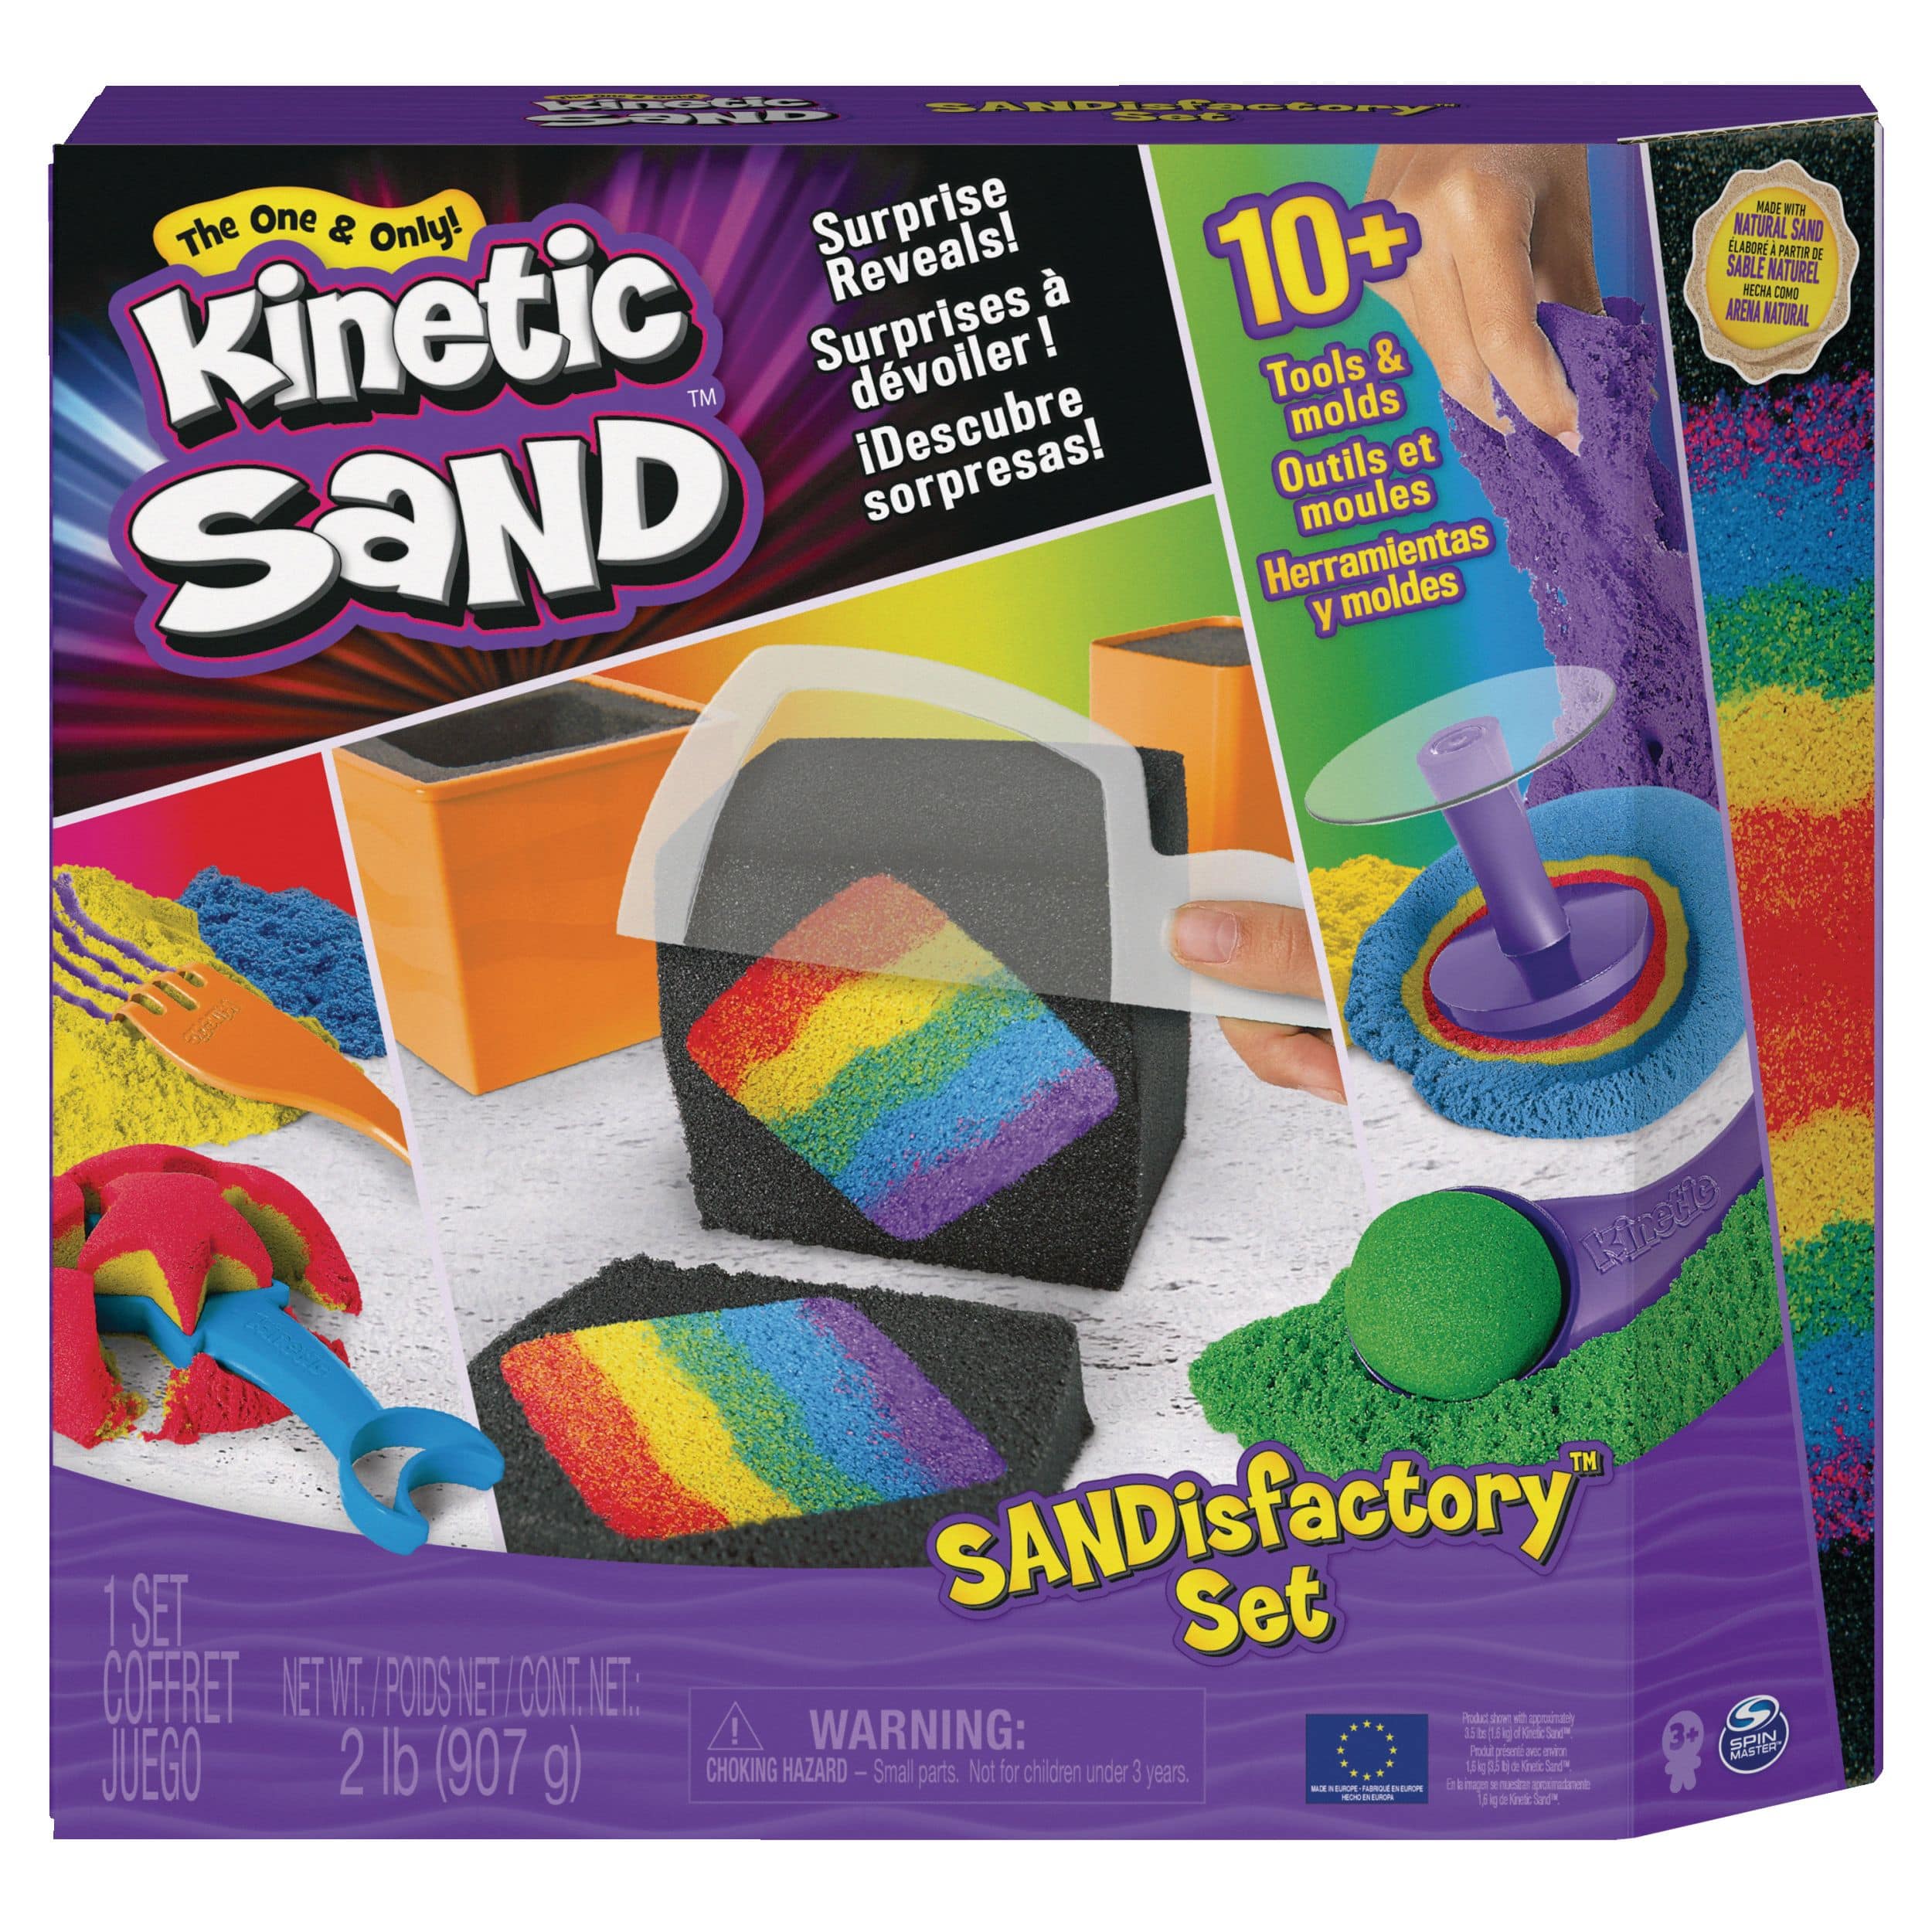 Kinetic Sand Sandisfactory Set with Tools & Molds, Squeezable Sensory Sand,  2 lb, 13-pc, Ages 3+